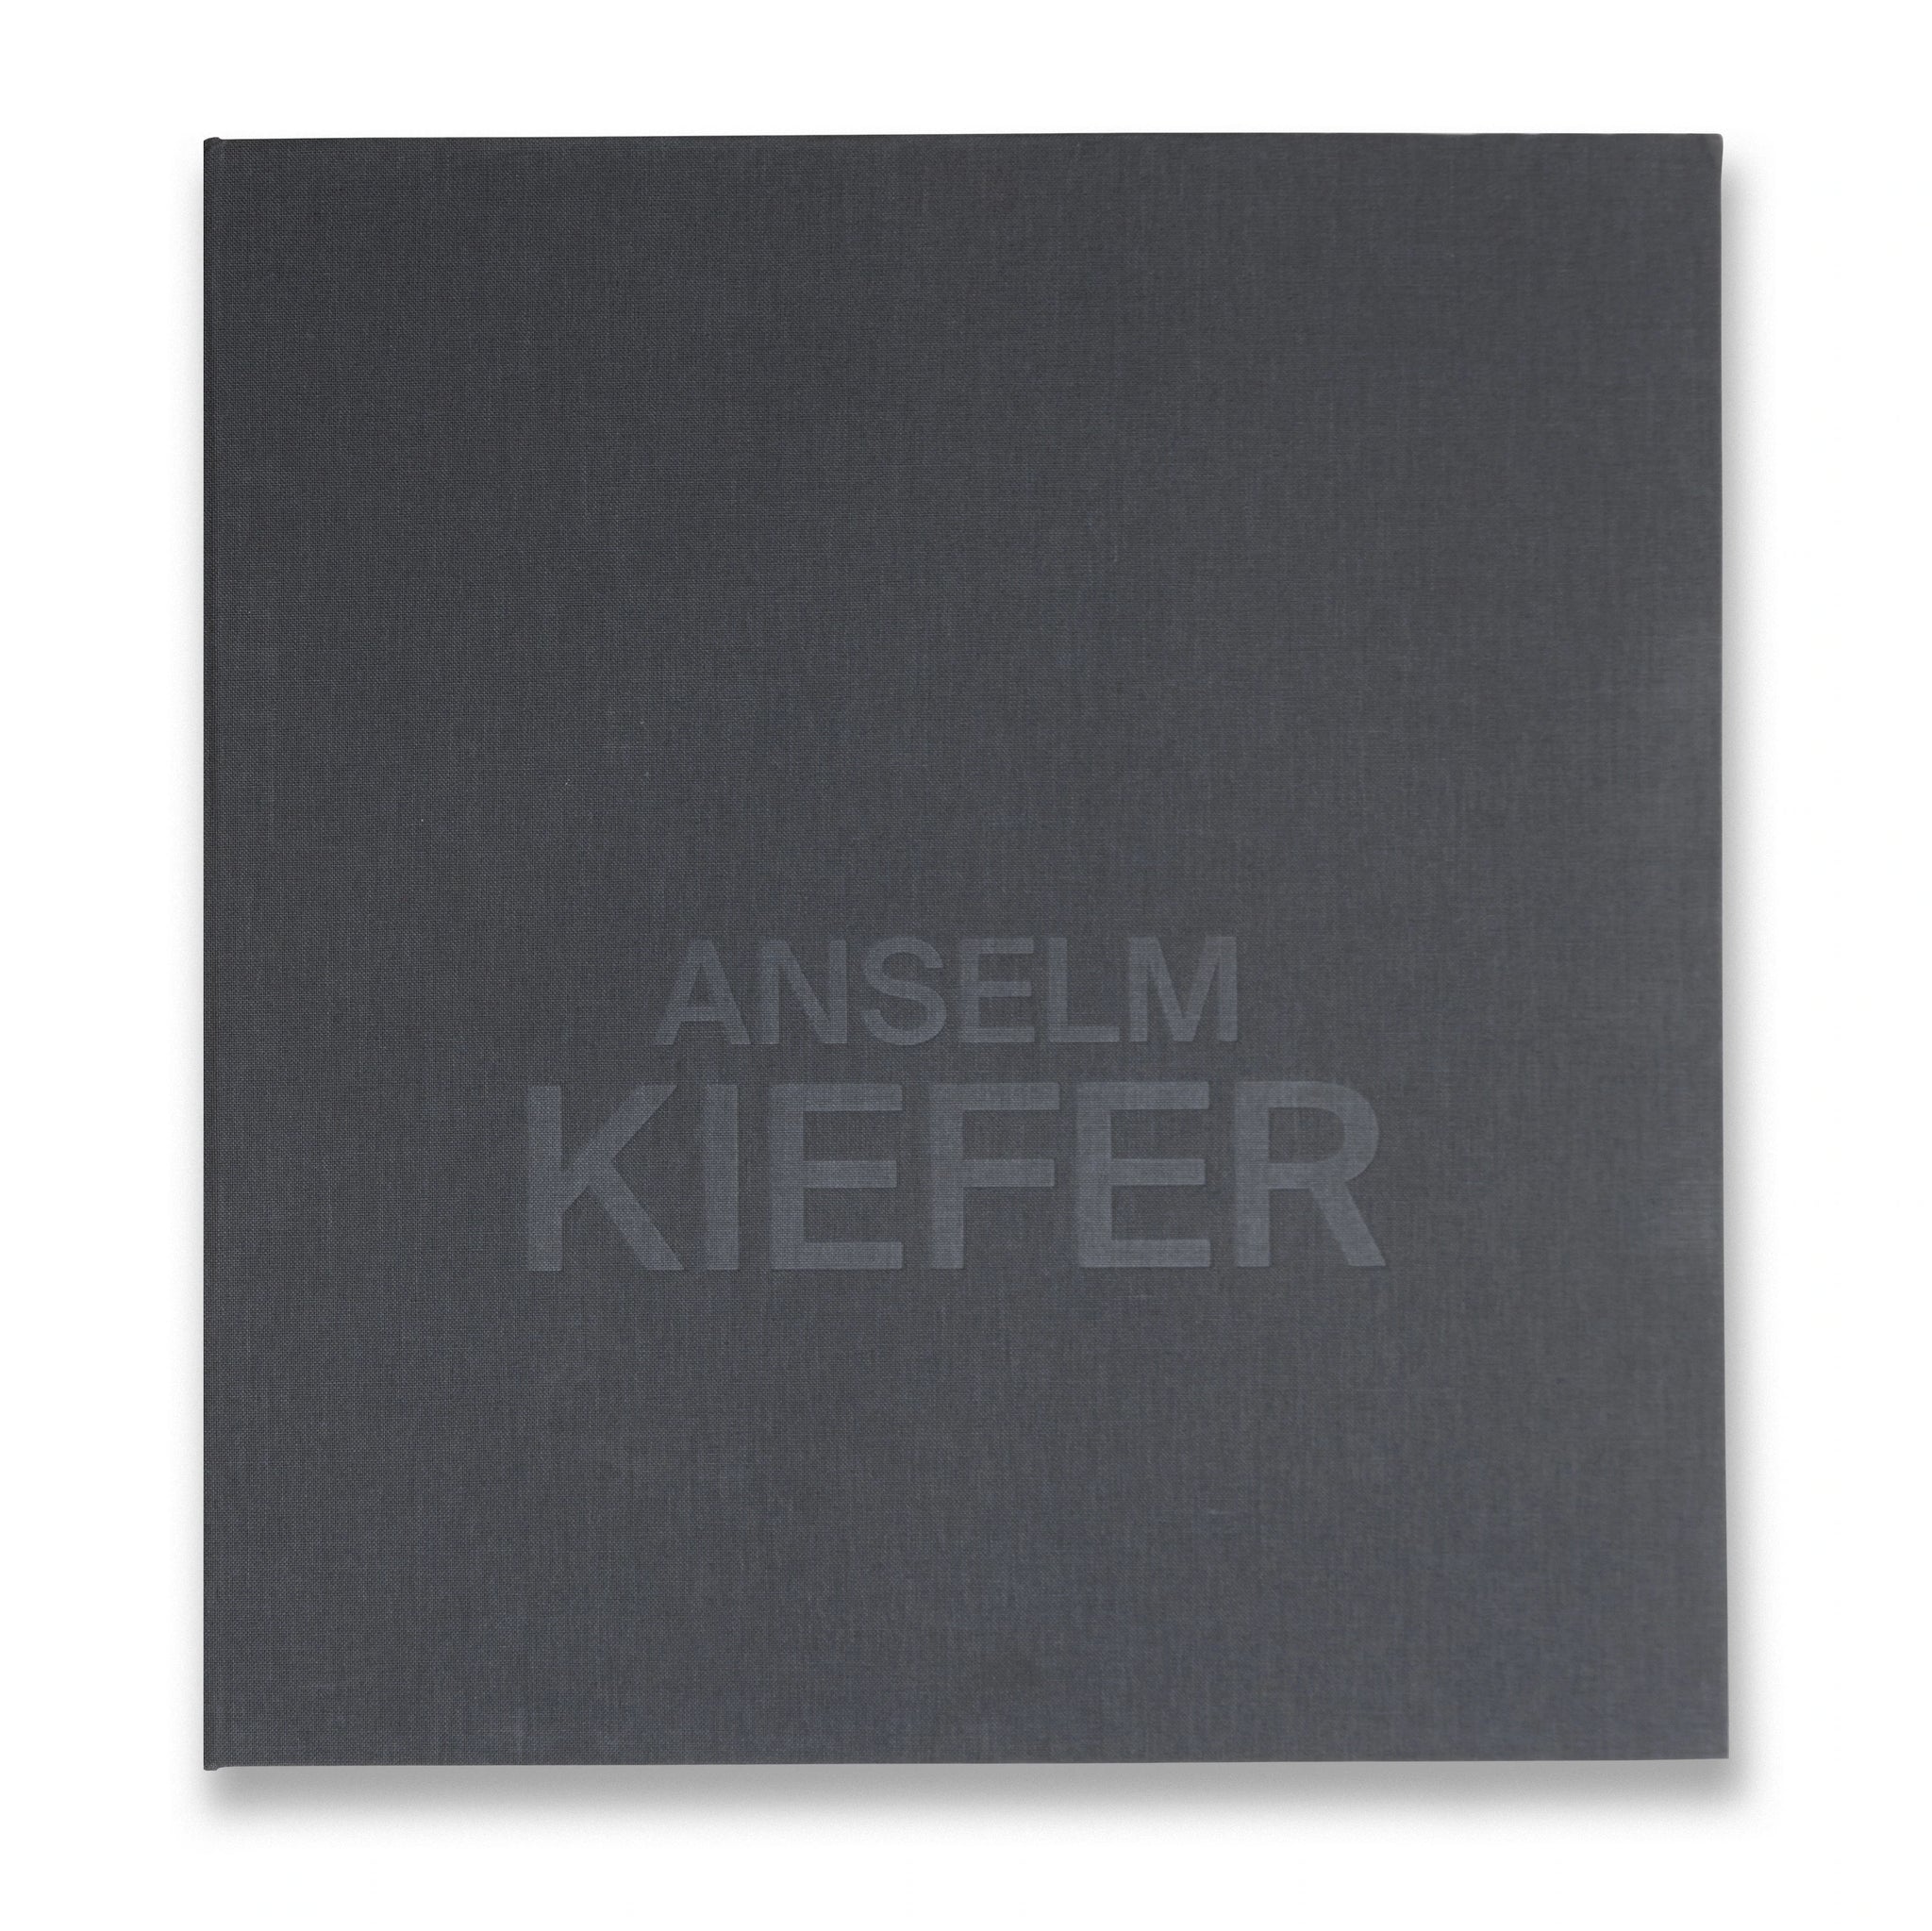 Clamshell box of Anselm Kiefer book, published by Royal Academy, London